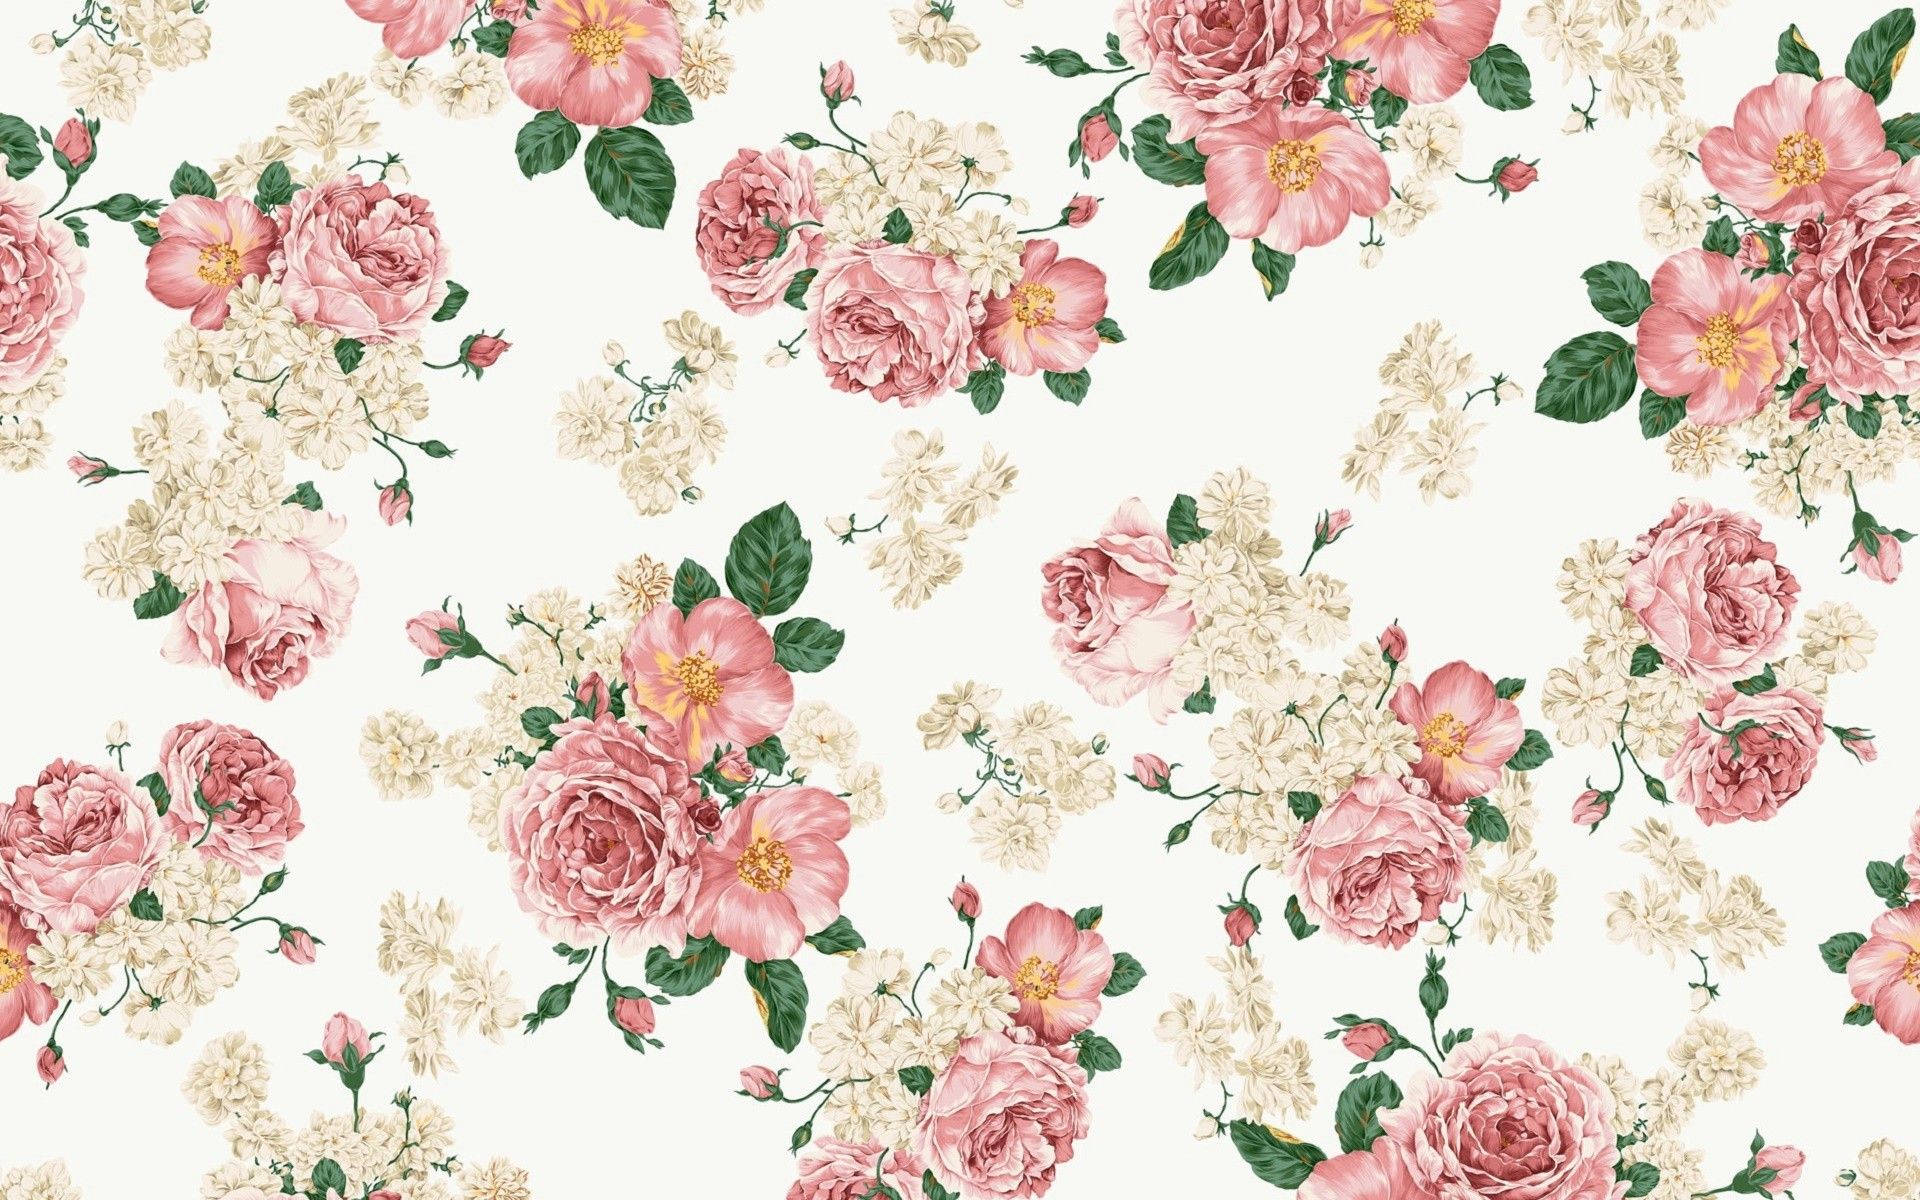 “Take a step back to enjoy life's simple beauty with this vintage floral pattern” Wallpaper